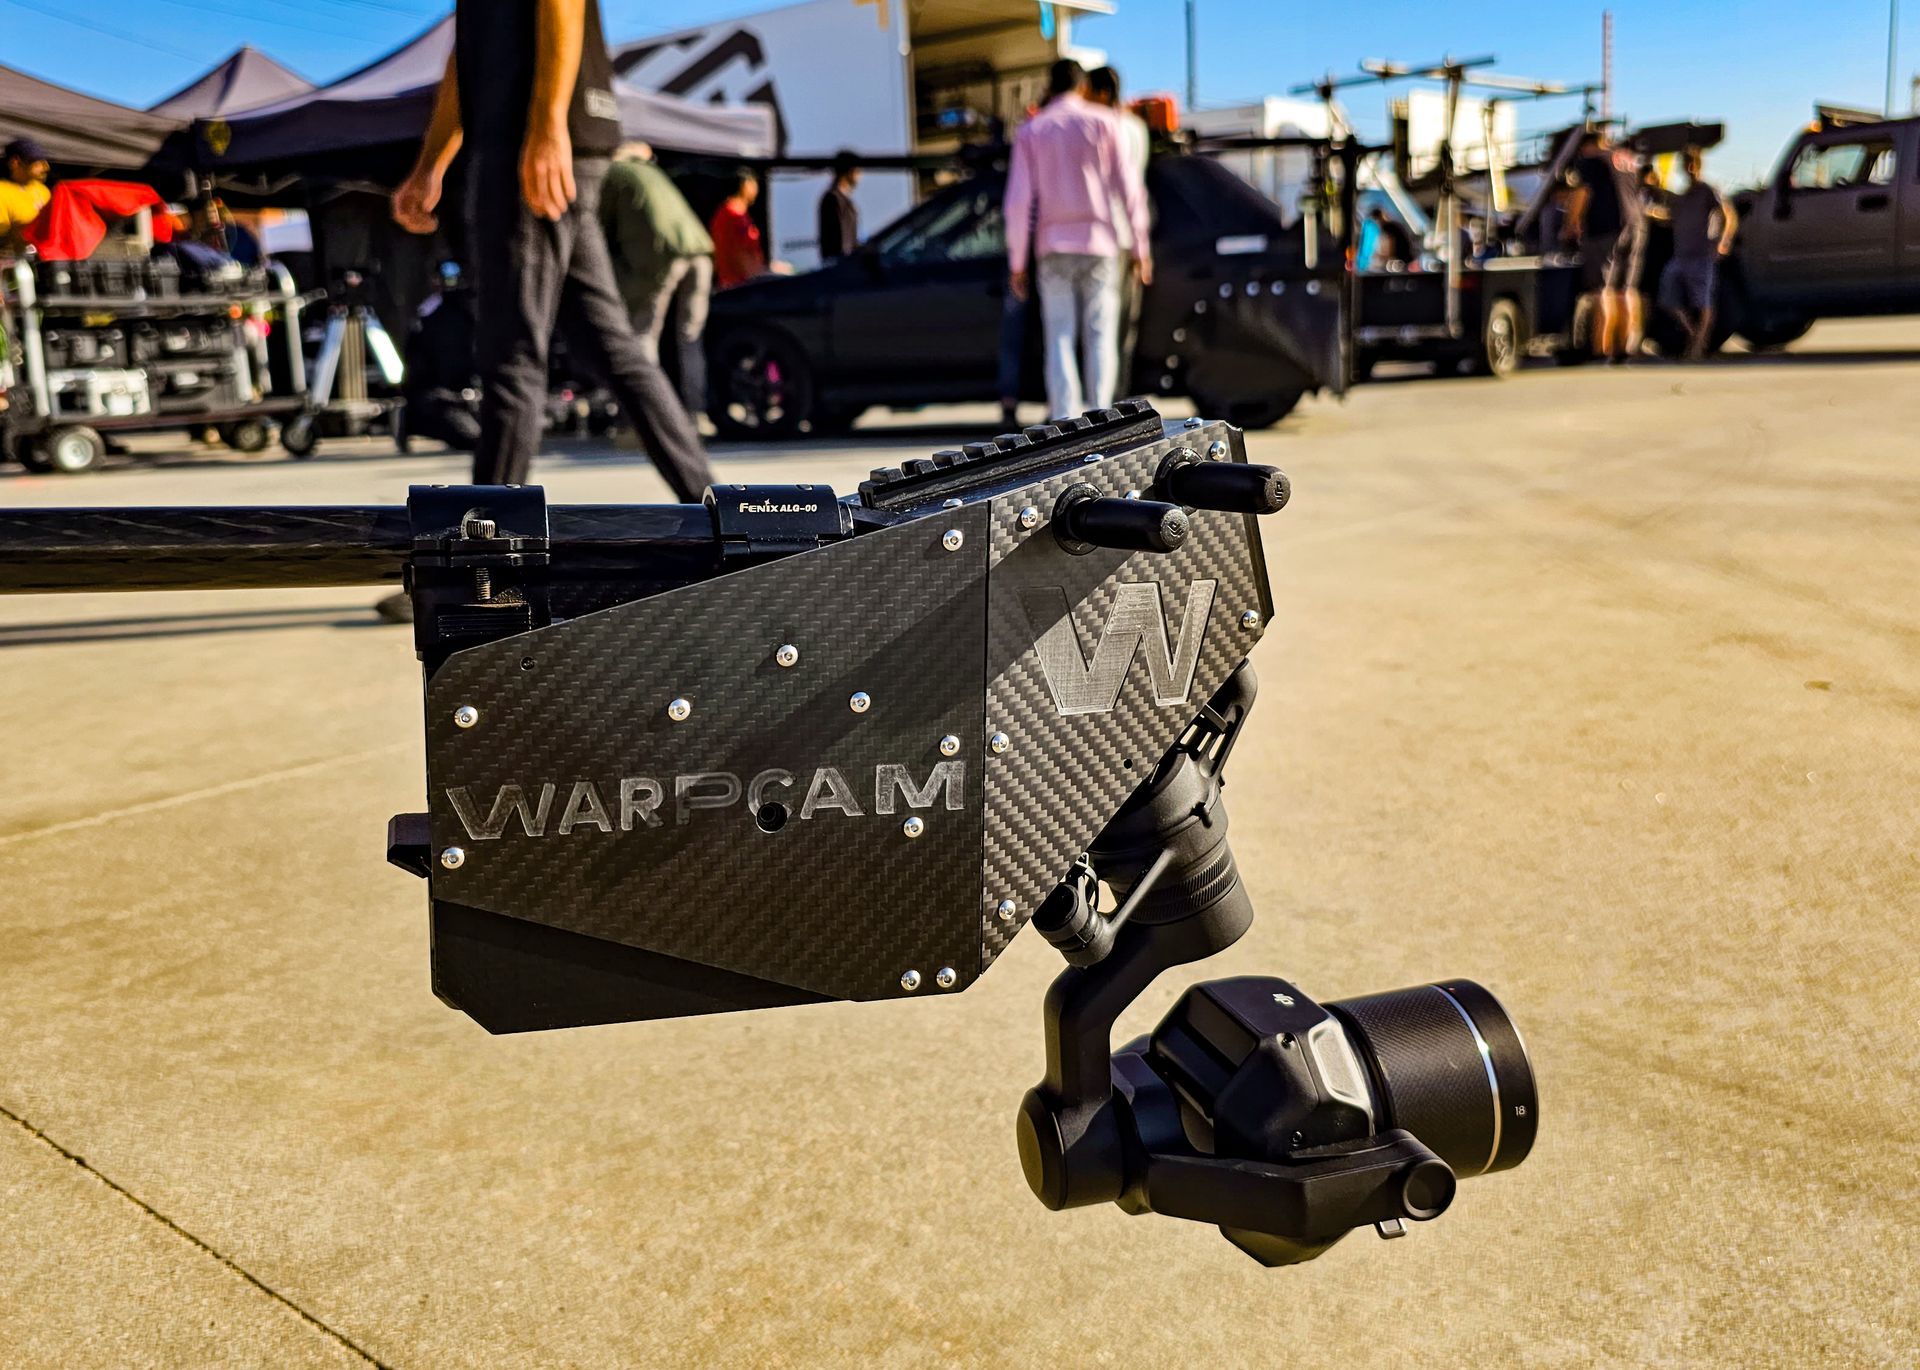 The WarpCam® system mounted on a complex rig, capturing a high-speed action sequence on a bustling movie set, with crew members in the background focused on the shoot.